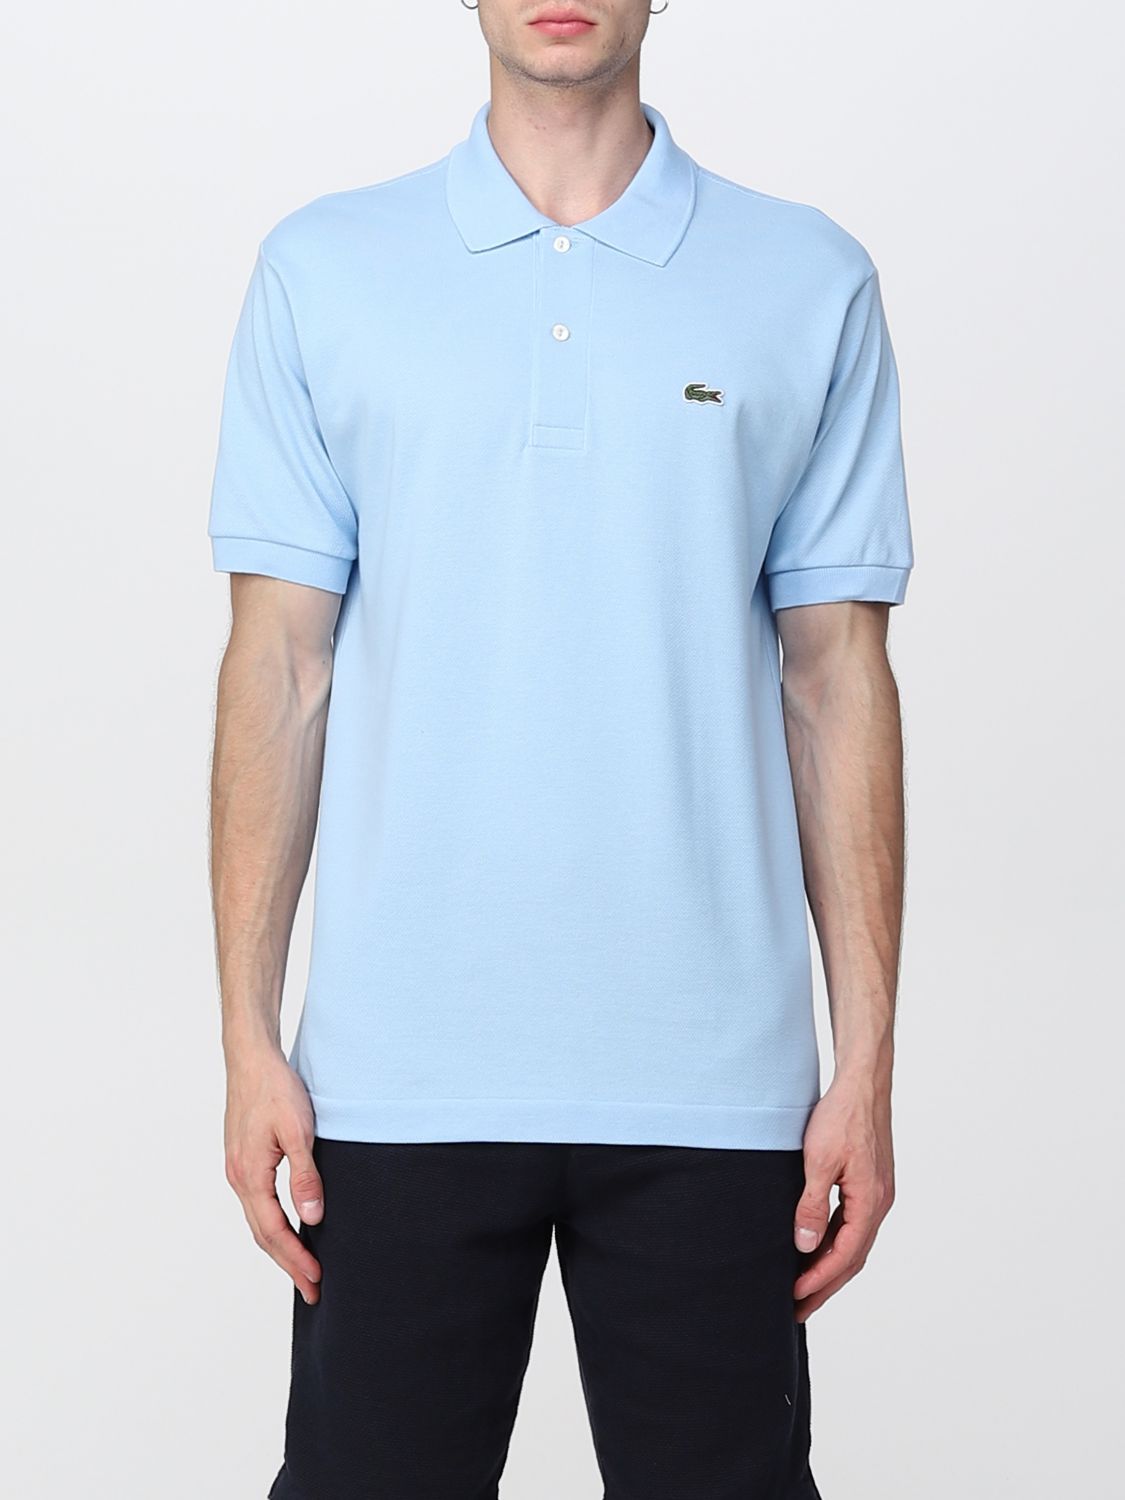 Meesterschap speelplaats Mand LACOSTE: basic polo shirt with logo - Dust | Lacoste polo shirt L1212  online on GIGLIO.COM